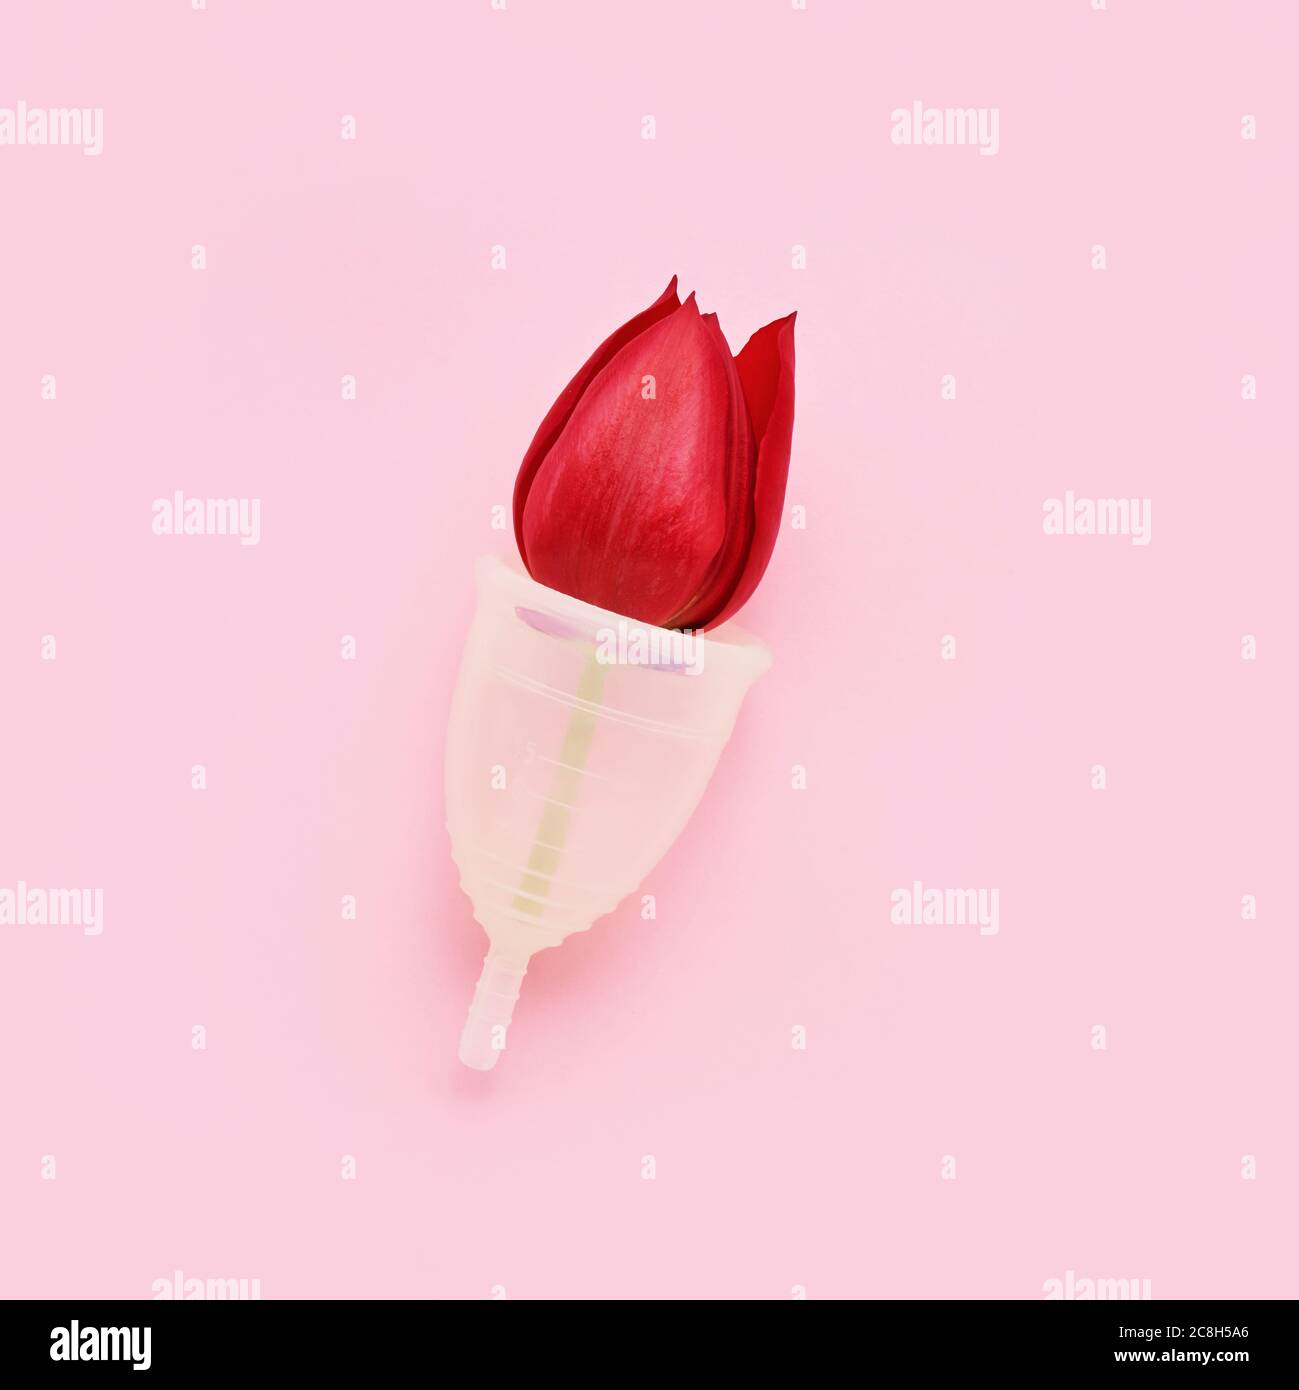 Reusable menstrual cup with red tulip inside on pink background. Alternative feminine hygiene product during the period. Women health concept. Zero wa Stock Photo